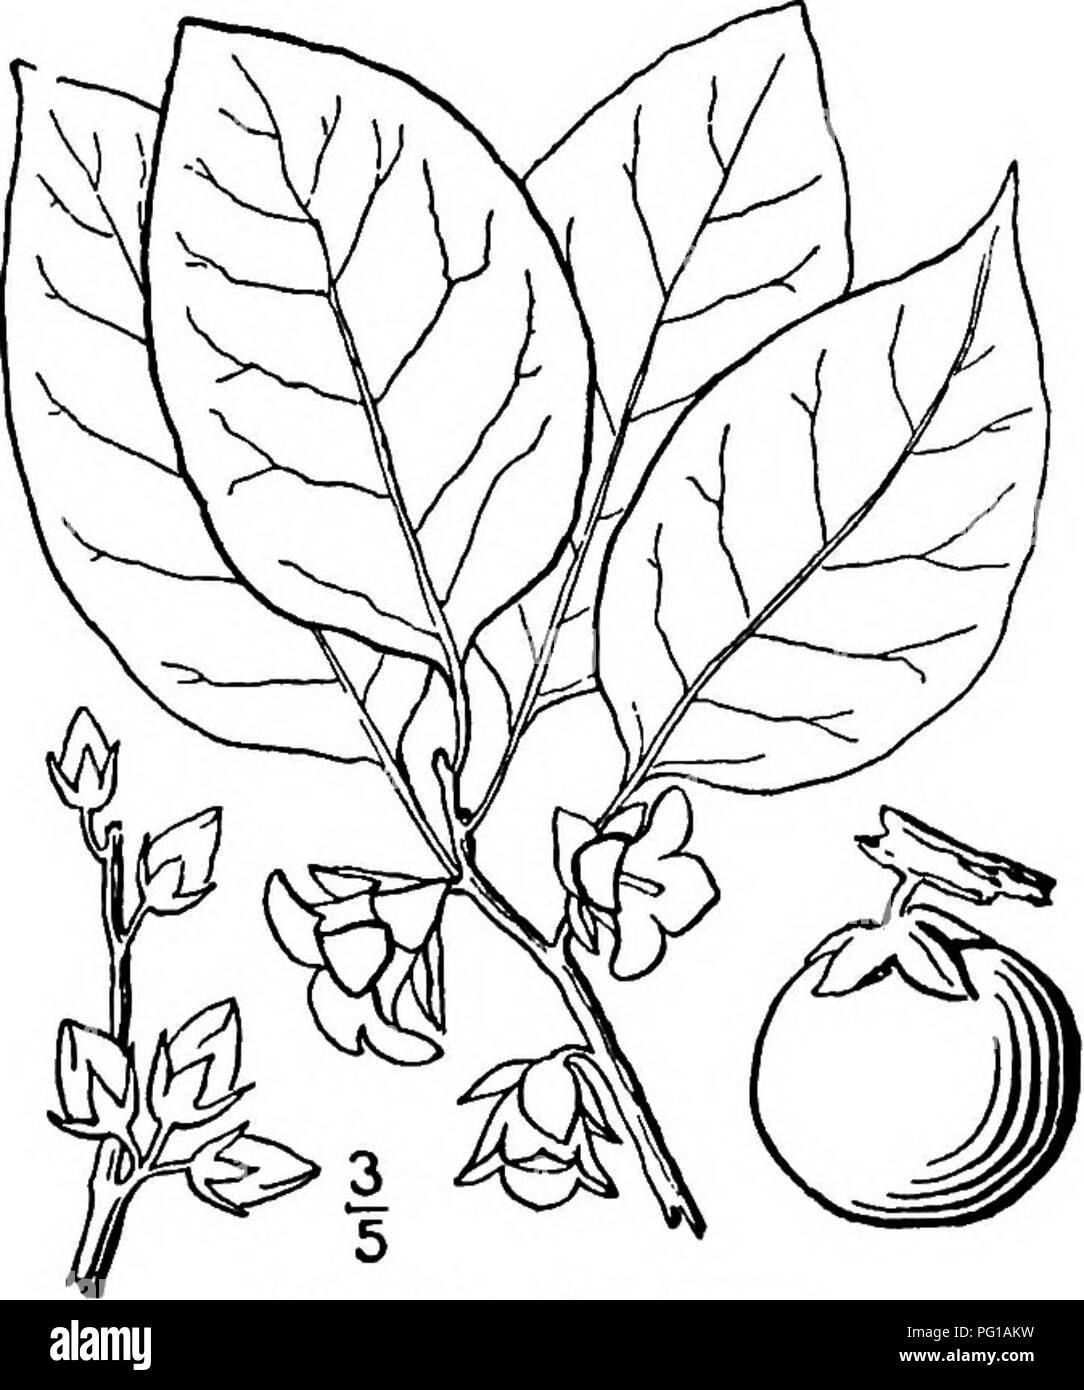 . North American trees : being descriptions and illustrations of the trees growing independently of cultivation in North America, north of Mexico and the West Indies . Trees. EBONY FAMILY EBENACEiE Ventenat ]HE Ebony Family is composed of some 275 species of trees and shrubs, grouped into 6 or 7 genera; they are widely distributed in tropical regions, a few only occurring in the temperate zones. Their wood is very hard, often susceptible of a high polish; the bark is astringent. The alternate simple entire-margined leaves are stalked but without stipules; the flowers are mostly dioecious, born Stock Photo